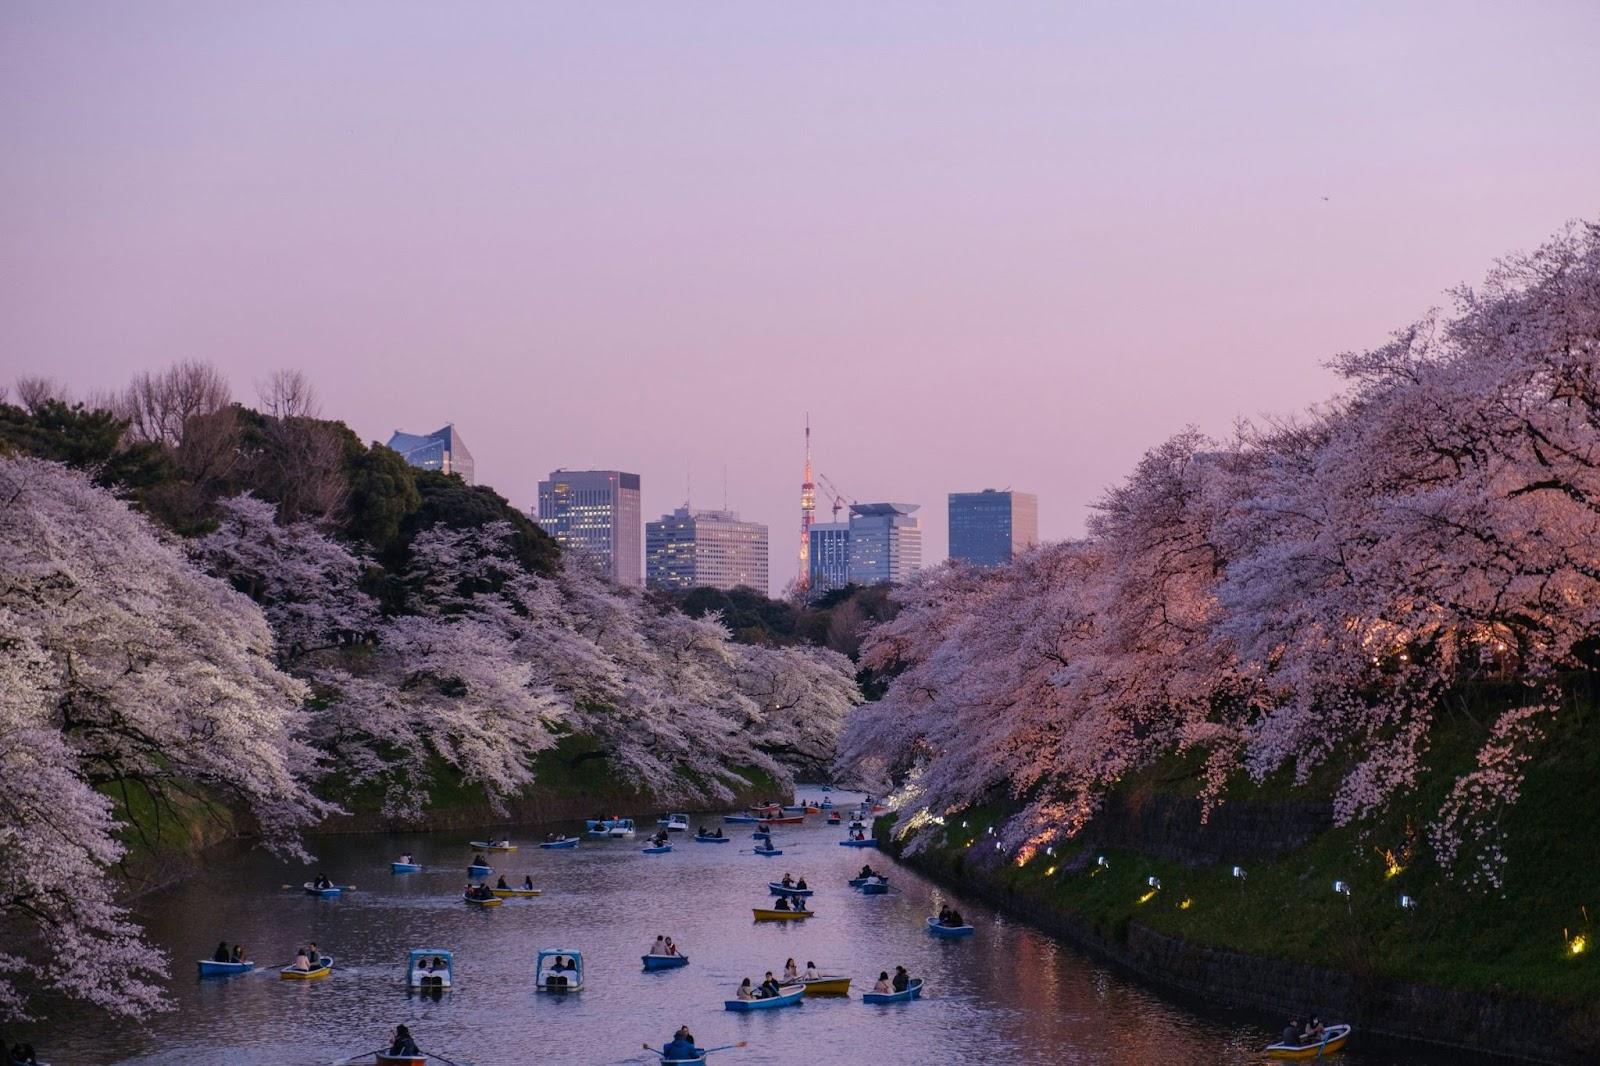 people in boats along river, surrounded by cherry blossom trees at sunset.
